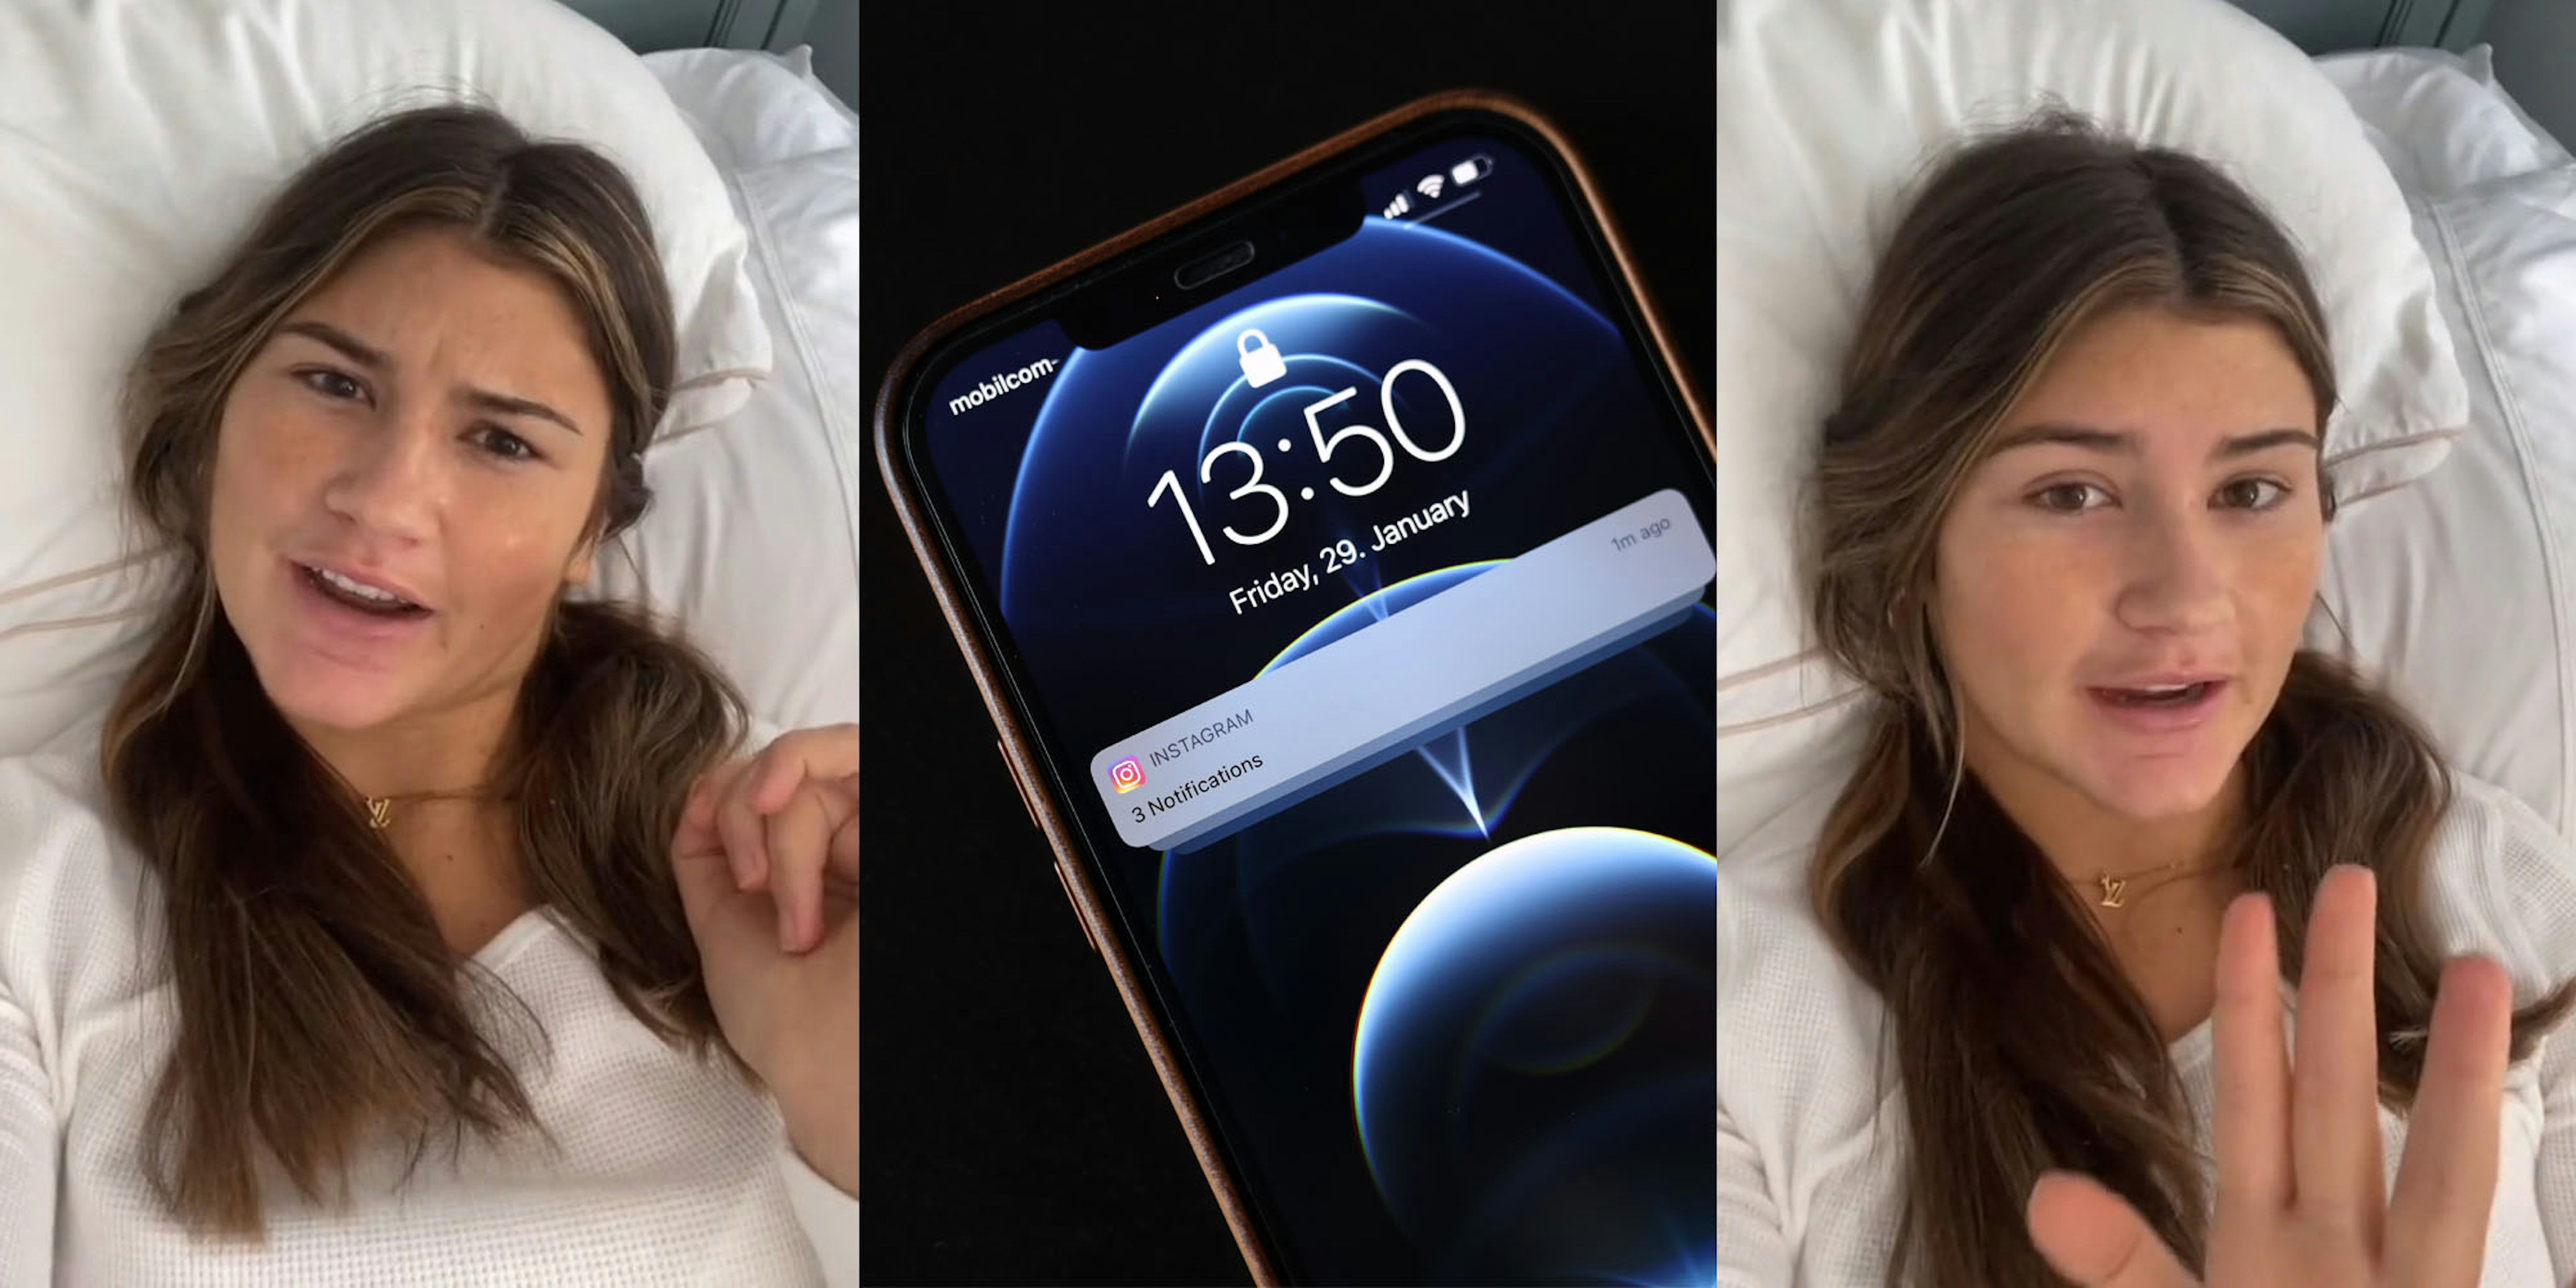 woman laying on bed speaking (l) phone with 3 Instagram notifications on screen in front of black background (c) woman laying on bed speaking with hand up (r)